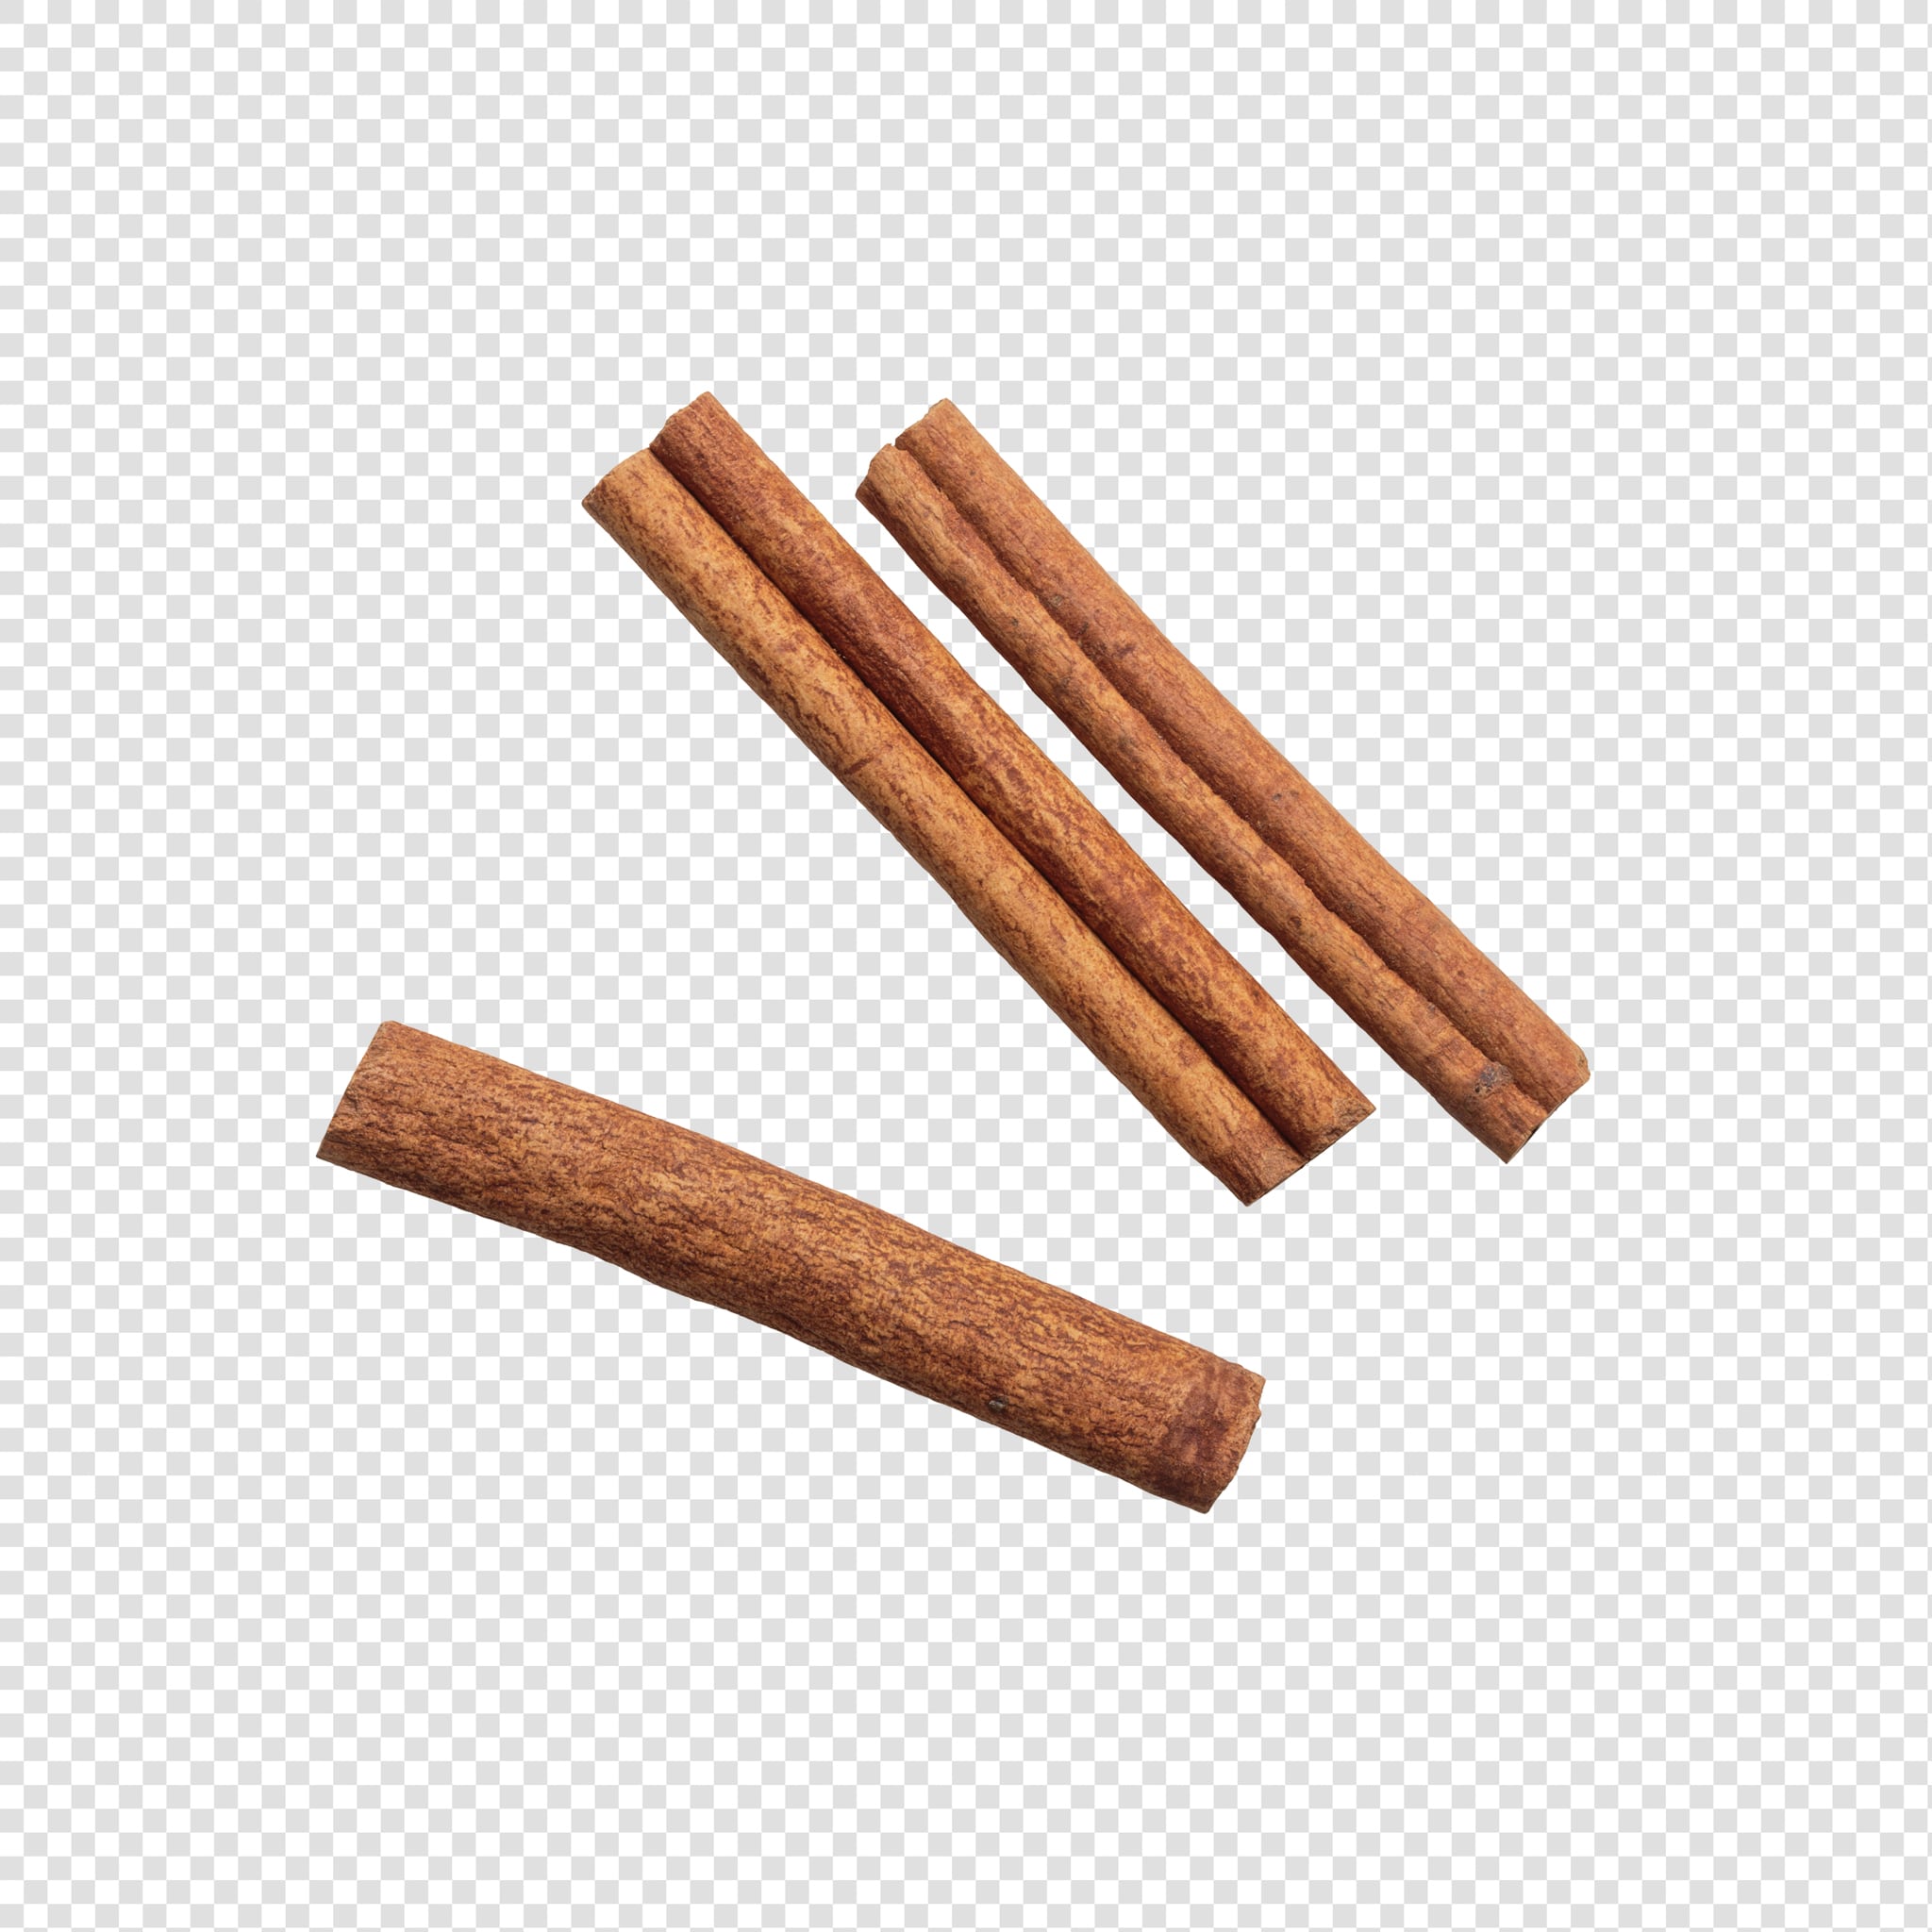 Cinnamon image asset with transparent background